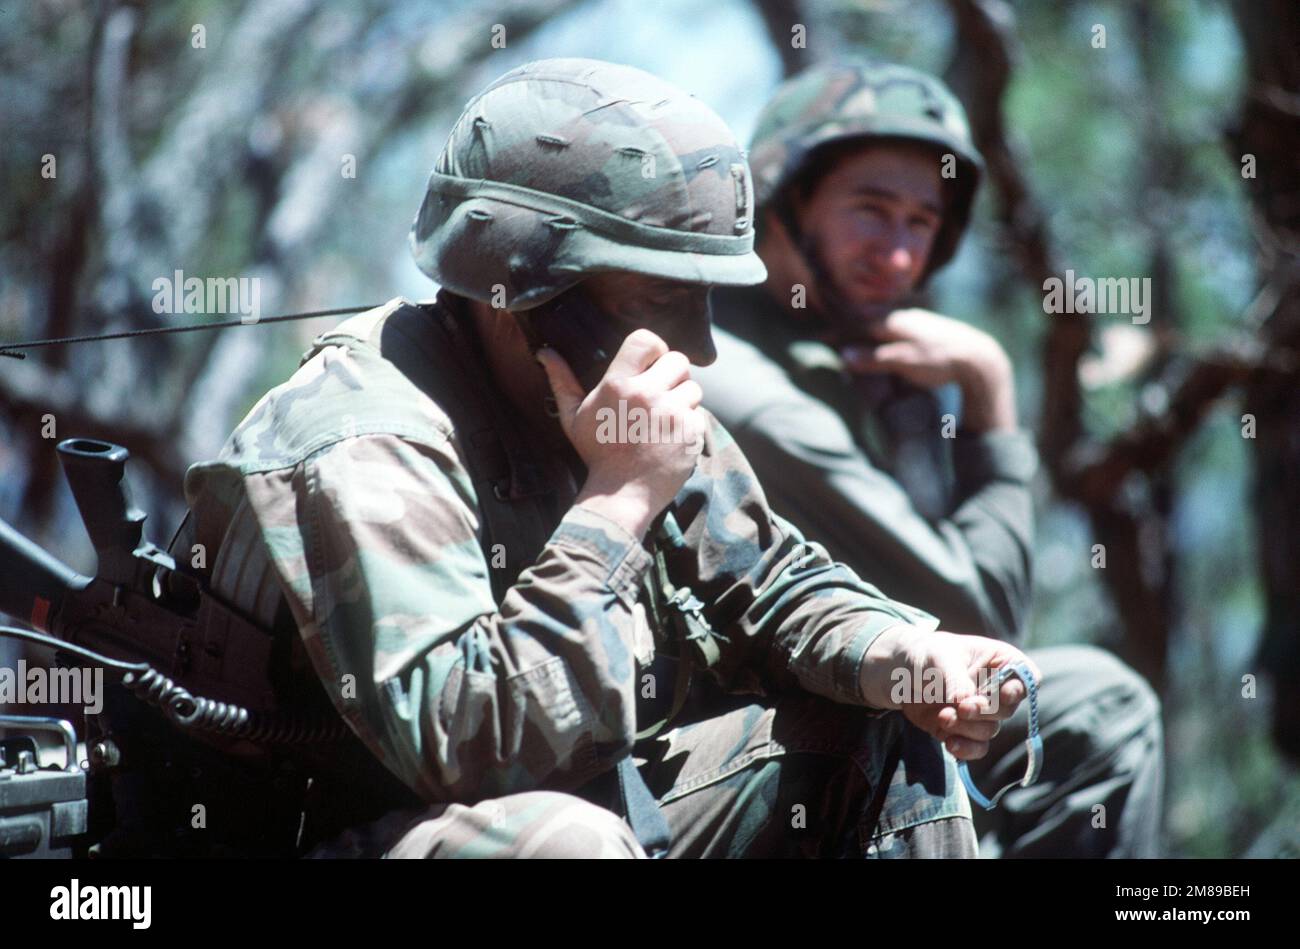 CAPT. David Hollands, a fire support officer for the 1ST Battalion, 17th Air Cavalry Brigade, calls in the AH-1 Cobra helicopter air strike on the Honduran artillery range at Campo Del Balomple. President Ronald Reagan mobilized U.S. exercise task force Dragon/Golden Pheasant, consisting of both the 82nd Airborne Division and the 7th Light Infantry Division, to help discourage Nicaraguan forces from entering Honduras. Subject Operation/Series: DRAGON/GOLDEN PHEASANT Base: Zambrano Country: Honduras (HND) Stock Photo